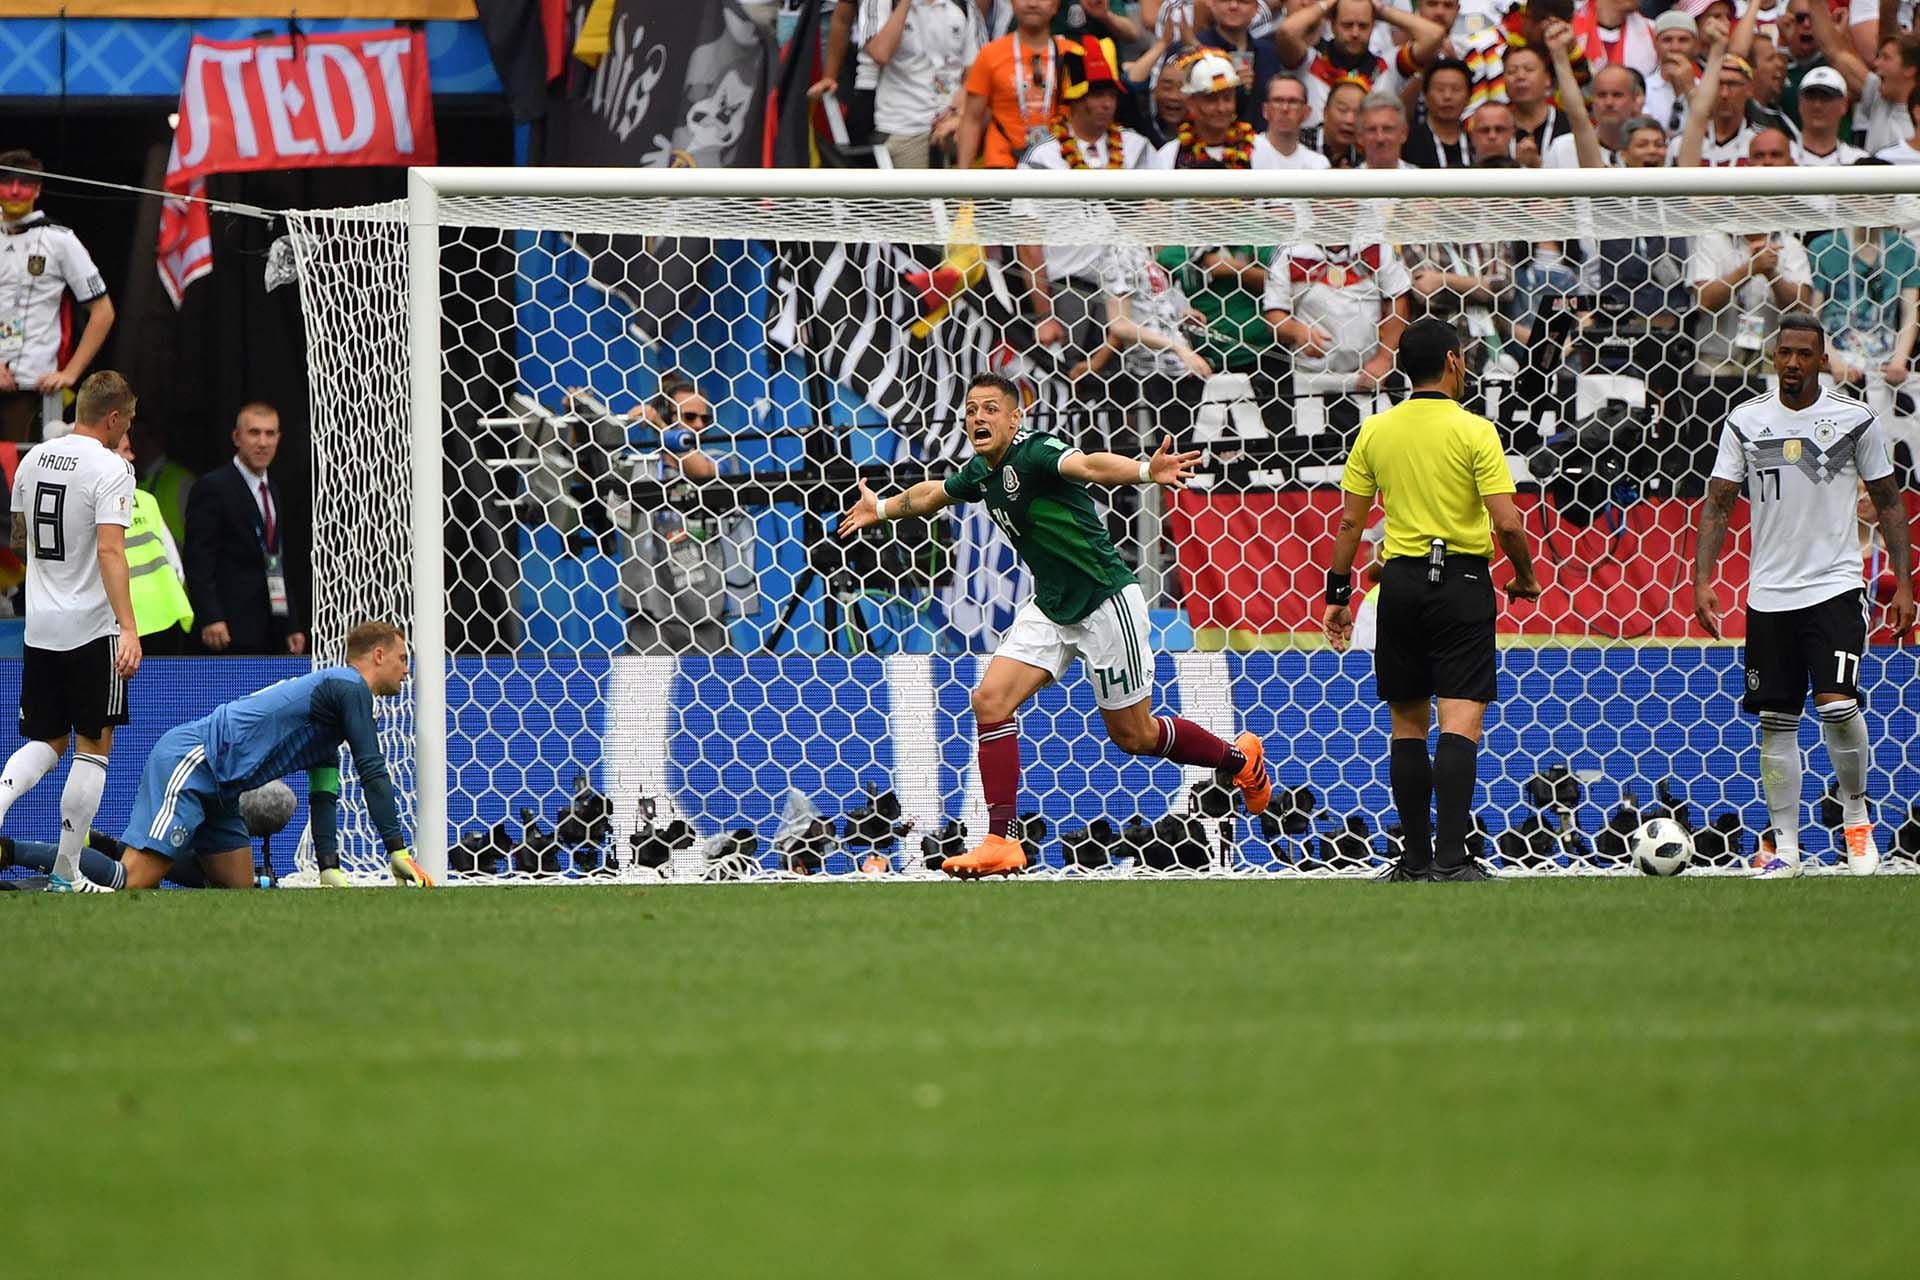 Mexico's forward Javier Hernandez celebrates their first goal during the Russia 2018 World Cup Group F football match between Germany and Mexico at the Luzhniki Stadium in Moscow on June 17, 2018. / AFP PHOTO / Yuri CORTEZ / RESTRICTED TO EDITORIAL USE - NO MOBILE PUSH ALERTS/DOWNLOADS